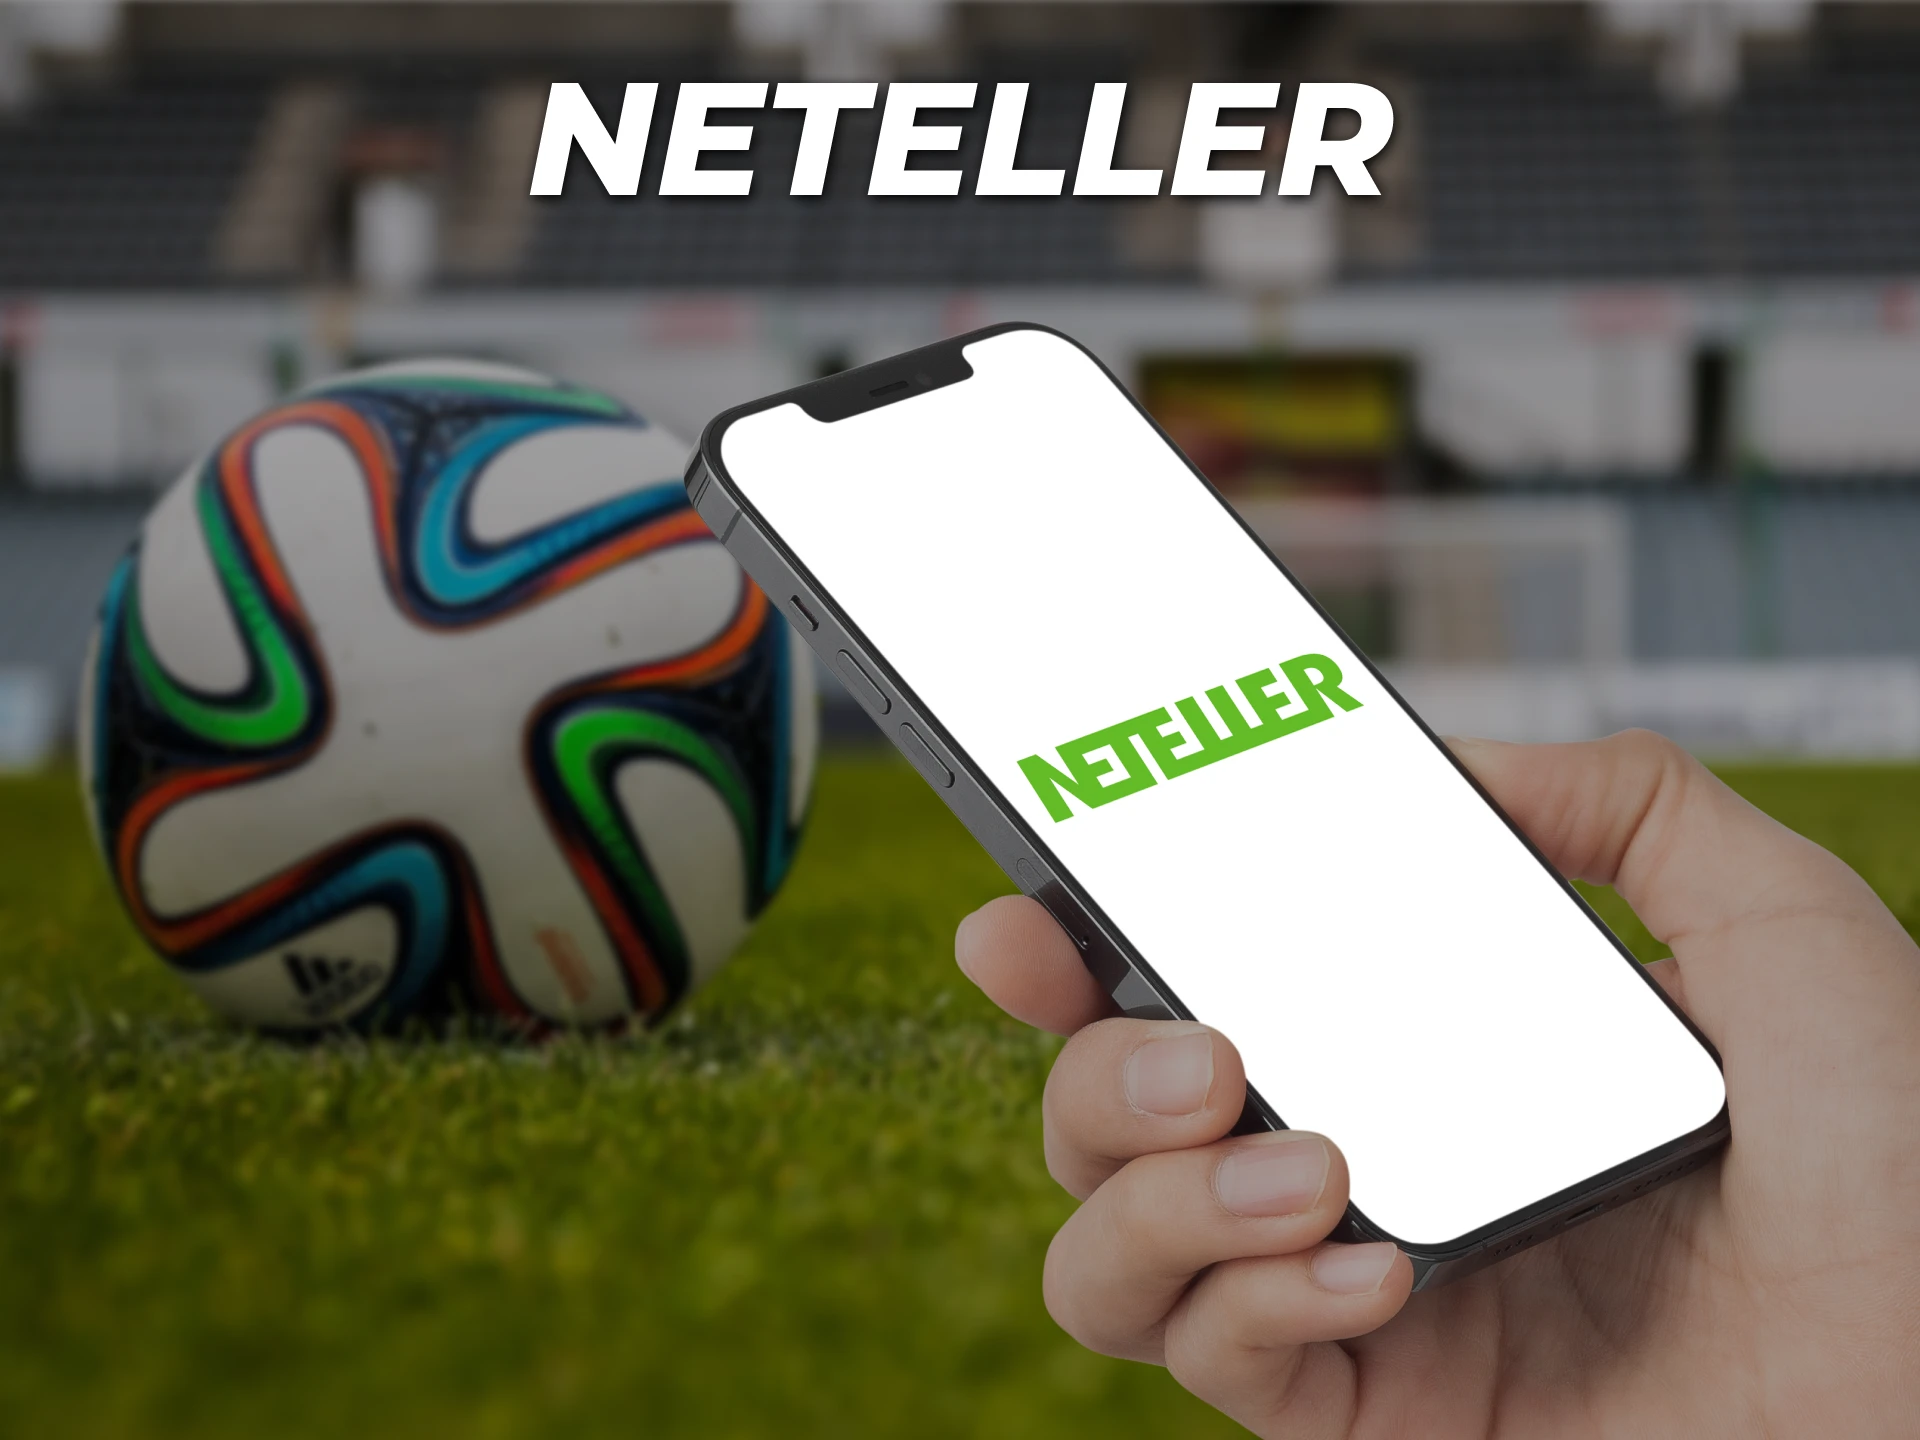 Neteller is an electronic wallet that supports cryptocurrency transactions.